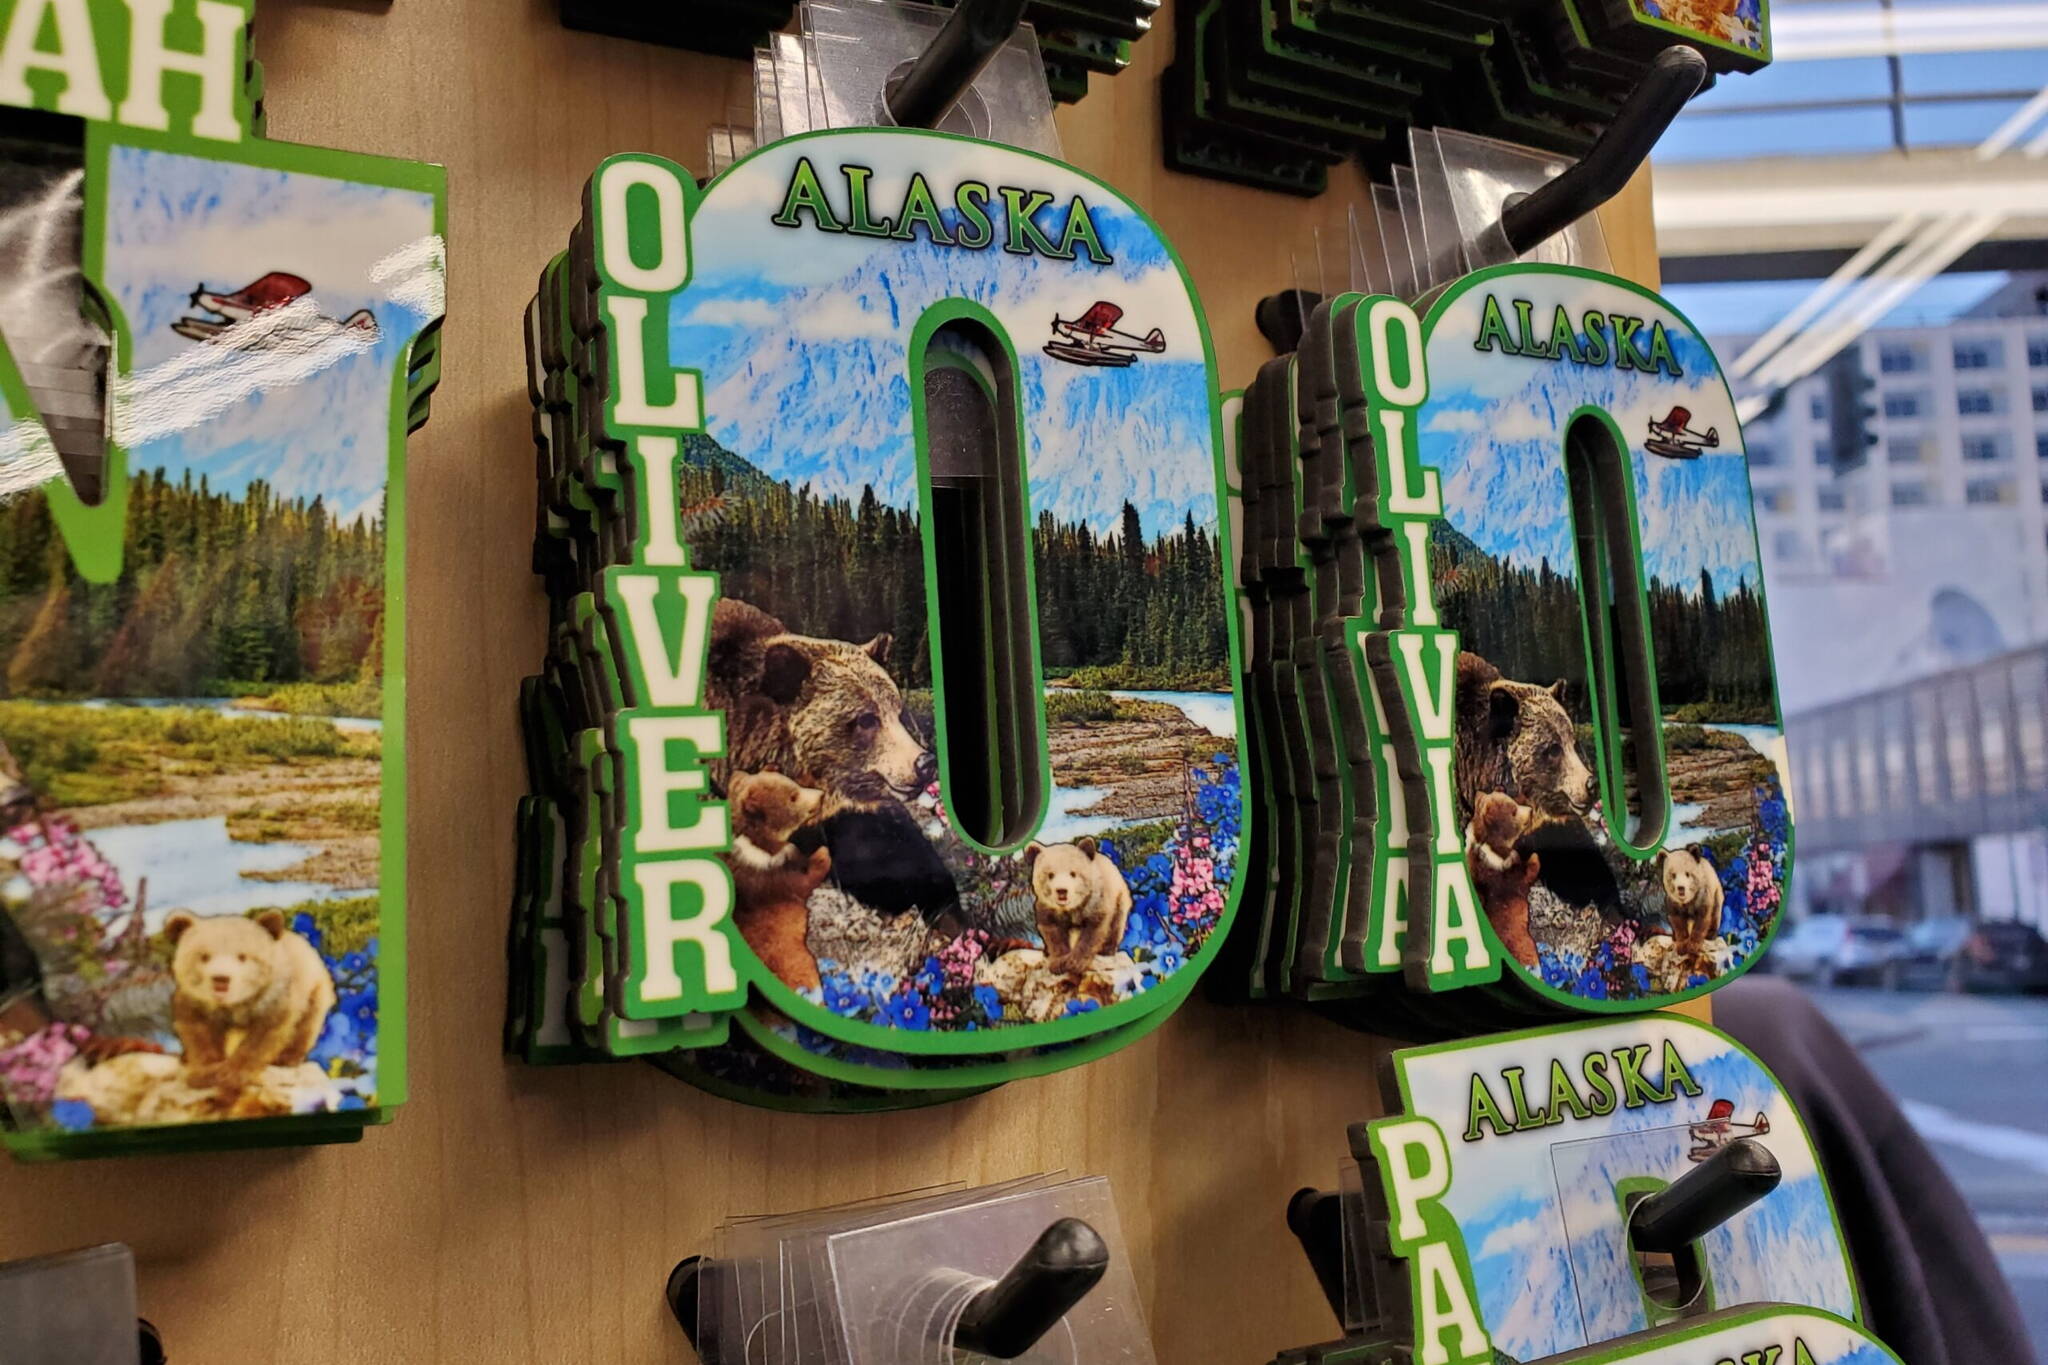 Alaska souvenirs bearing the names Oliver and Olivia are seen in a downtown Anchorage gift shop on Thursday. Oliver was the most popular name for baby boys in Alaska in 2022, and Olivia was one of the most popular names for baby girls. (Photo by Yereth Rosen/Alaska Beacon)